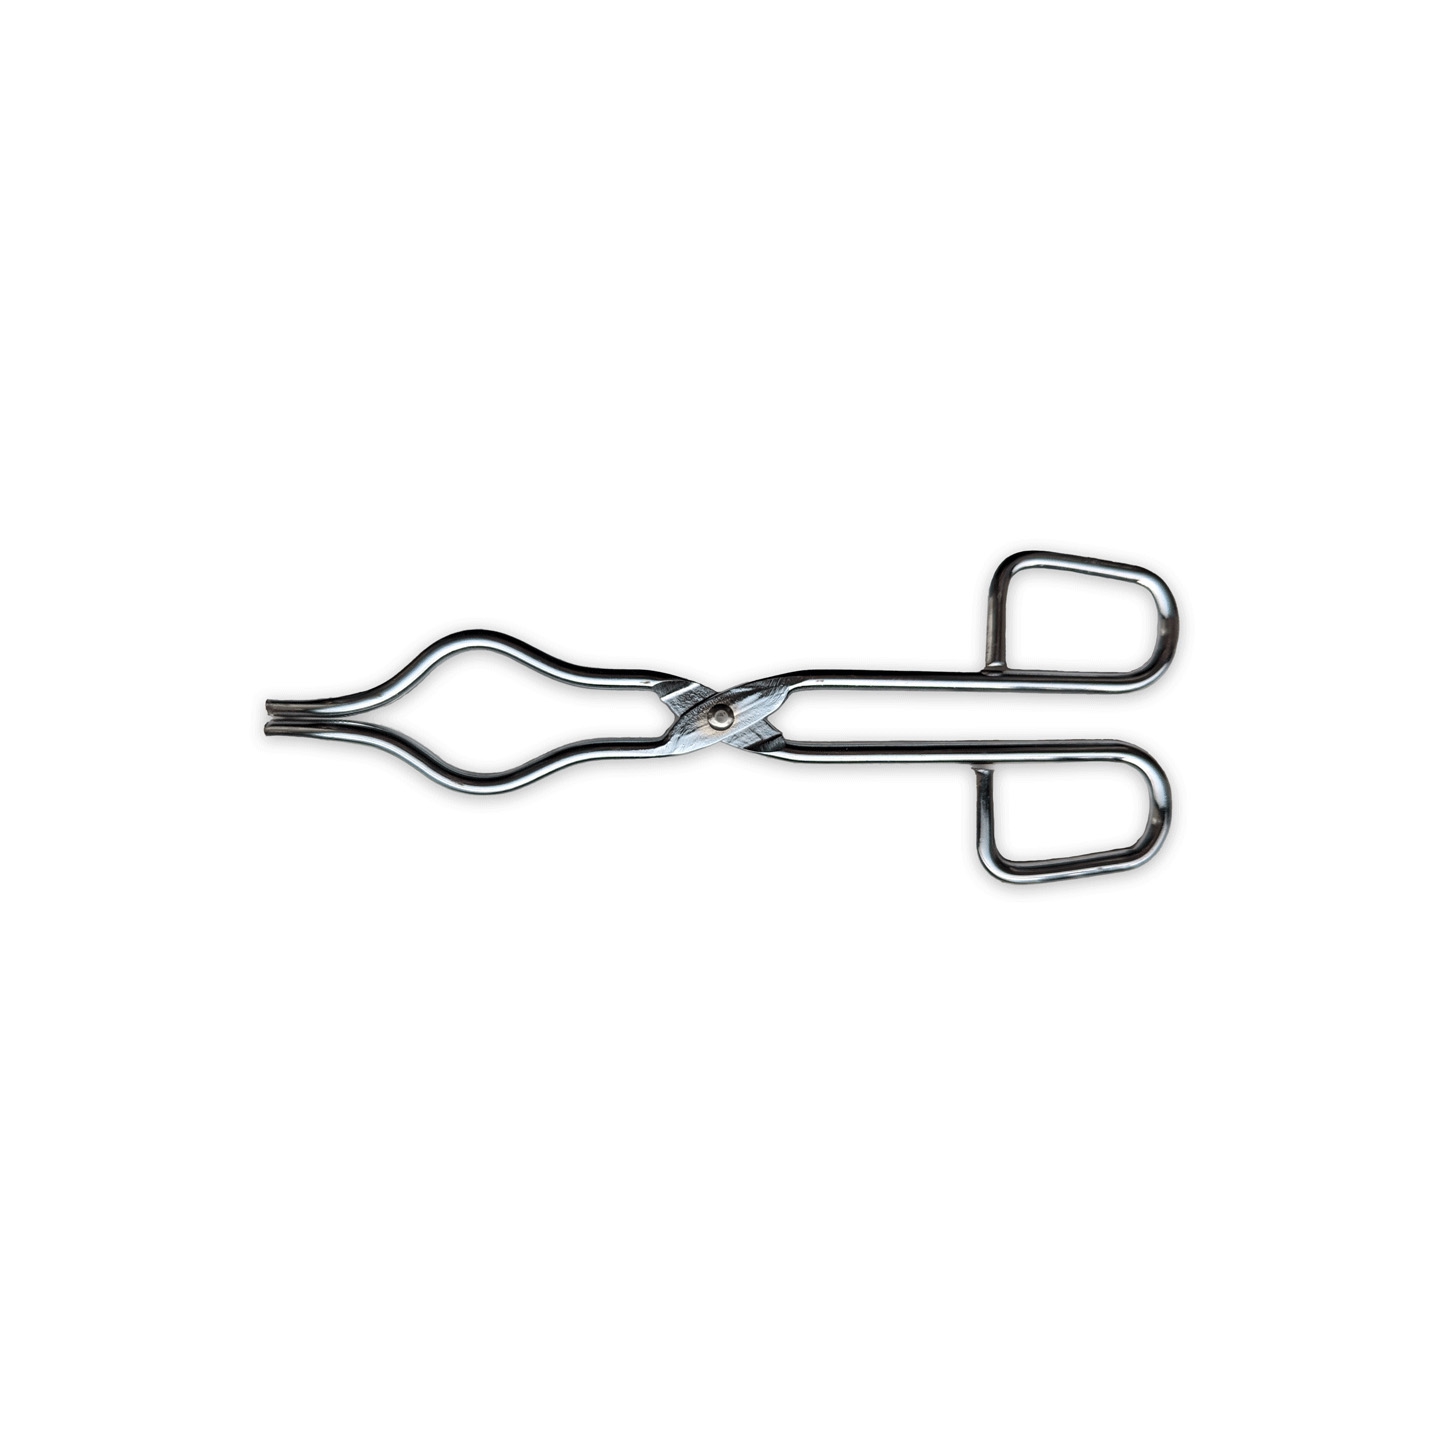 Crucible Tong, Plated Steel, Length 250mm, Bow Curved Tips, Flat Hinge